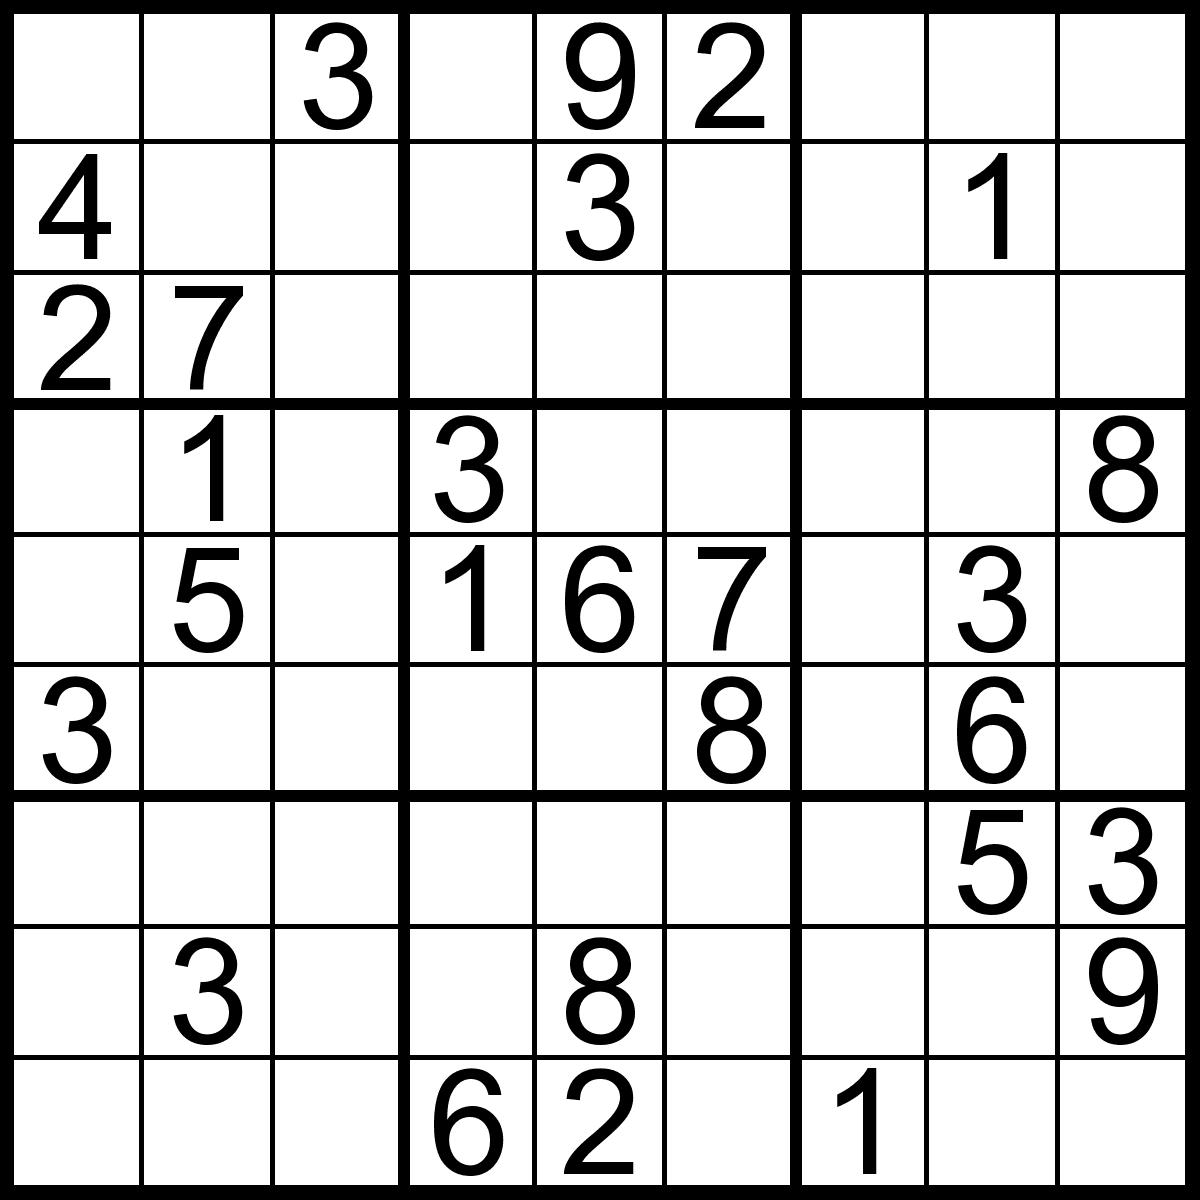 juego sudoku apk for android